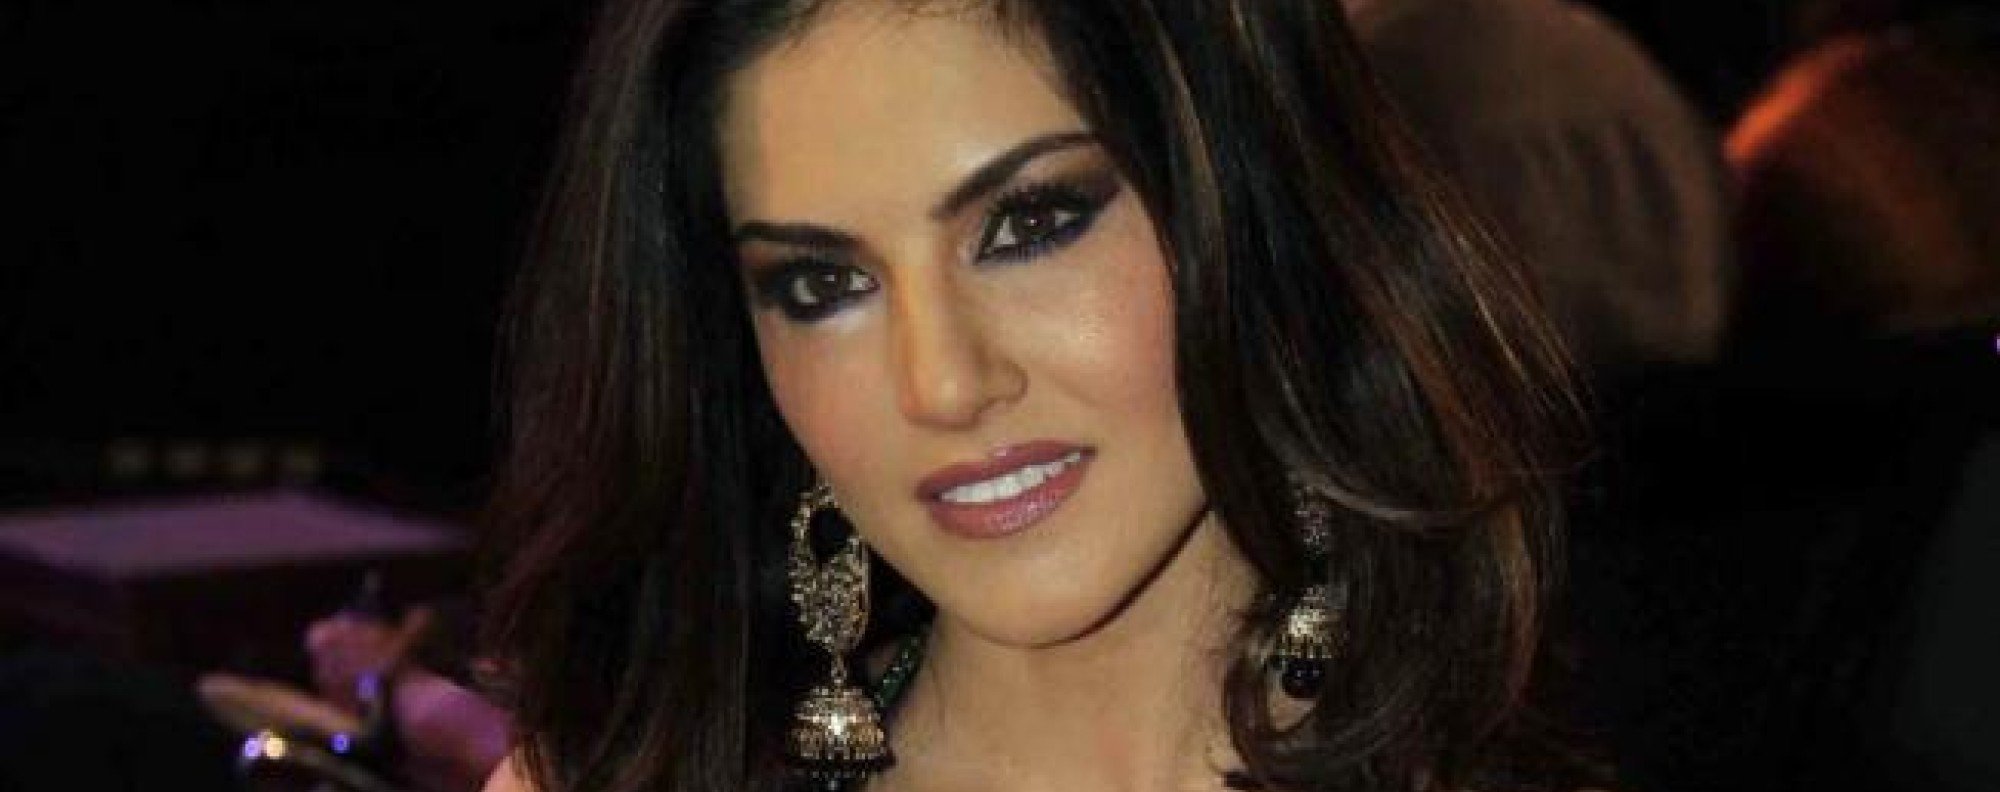 Bp Xxx Sex Rape - Rape crisis in India leads to calls for porn star Sunny Leone to be jailed  | South China Morning Post